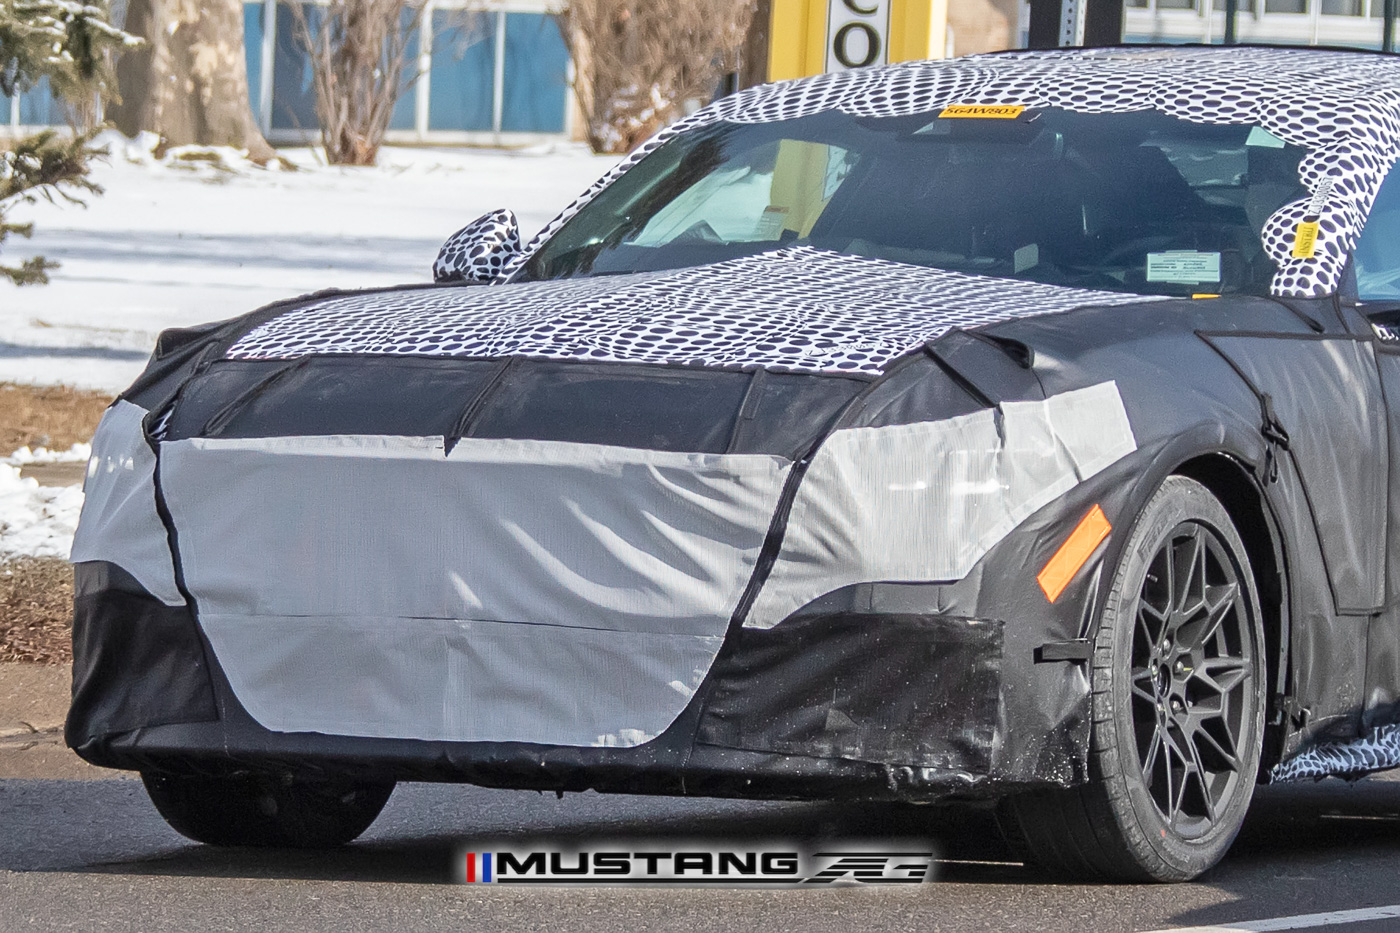 S650 Mustang Spied: New Mustang Prototype w/ Mach 1-Style Wheels, Upgraded Dual Caliper Rear Brakes 📸 s650-mustang-new-mach1-prototype-spied-3